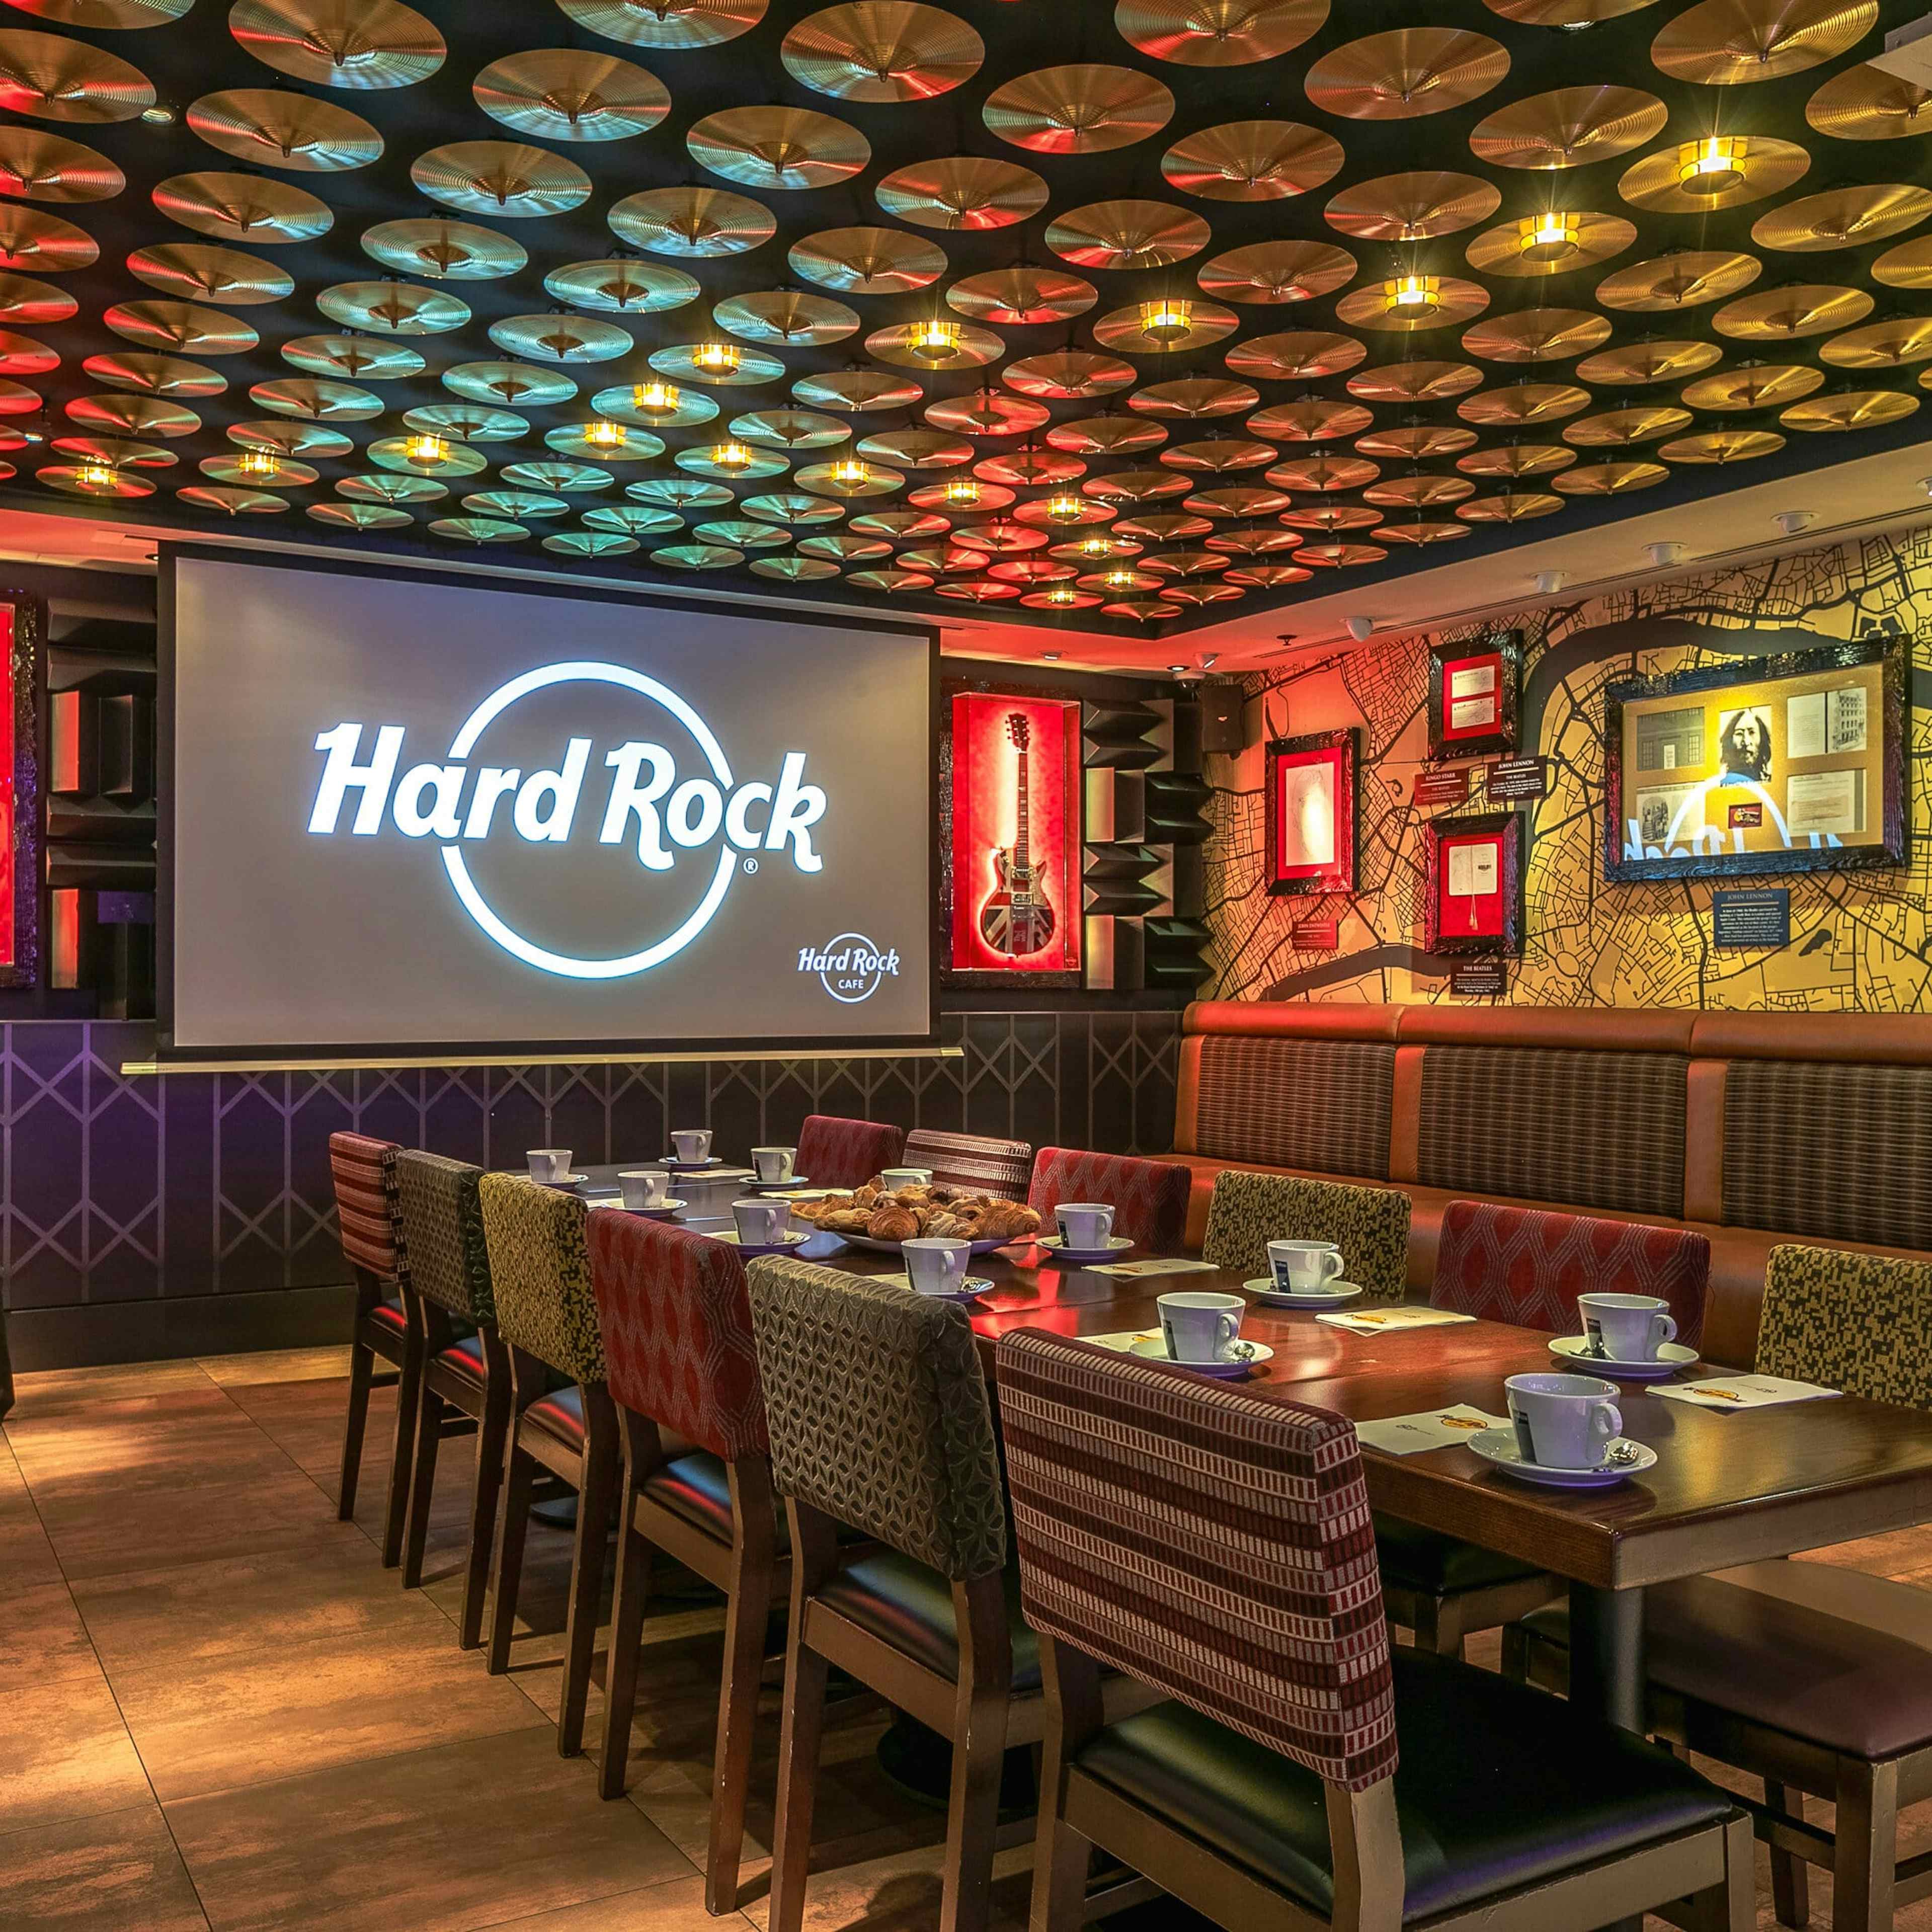 Hard Rock Cafe Piccadilly Circus - Legends Room image 2